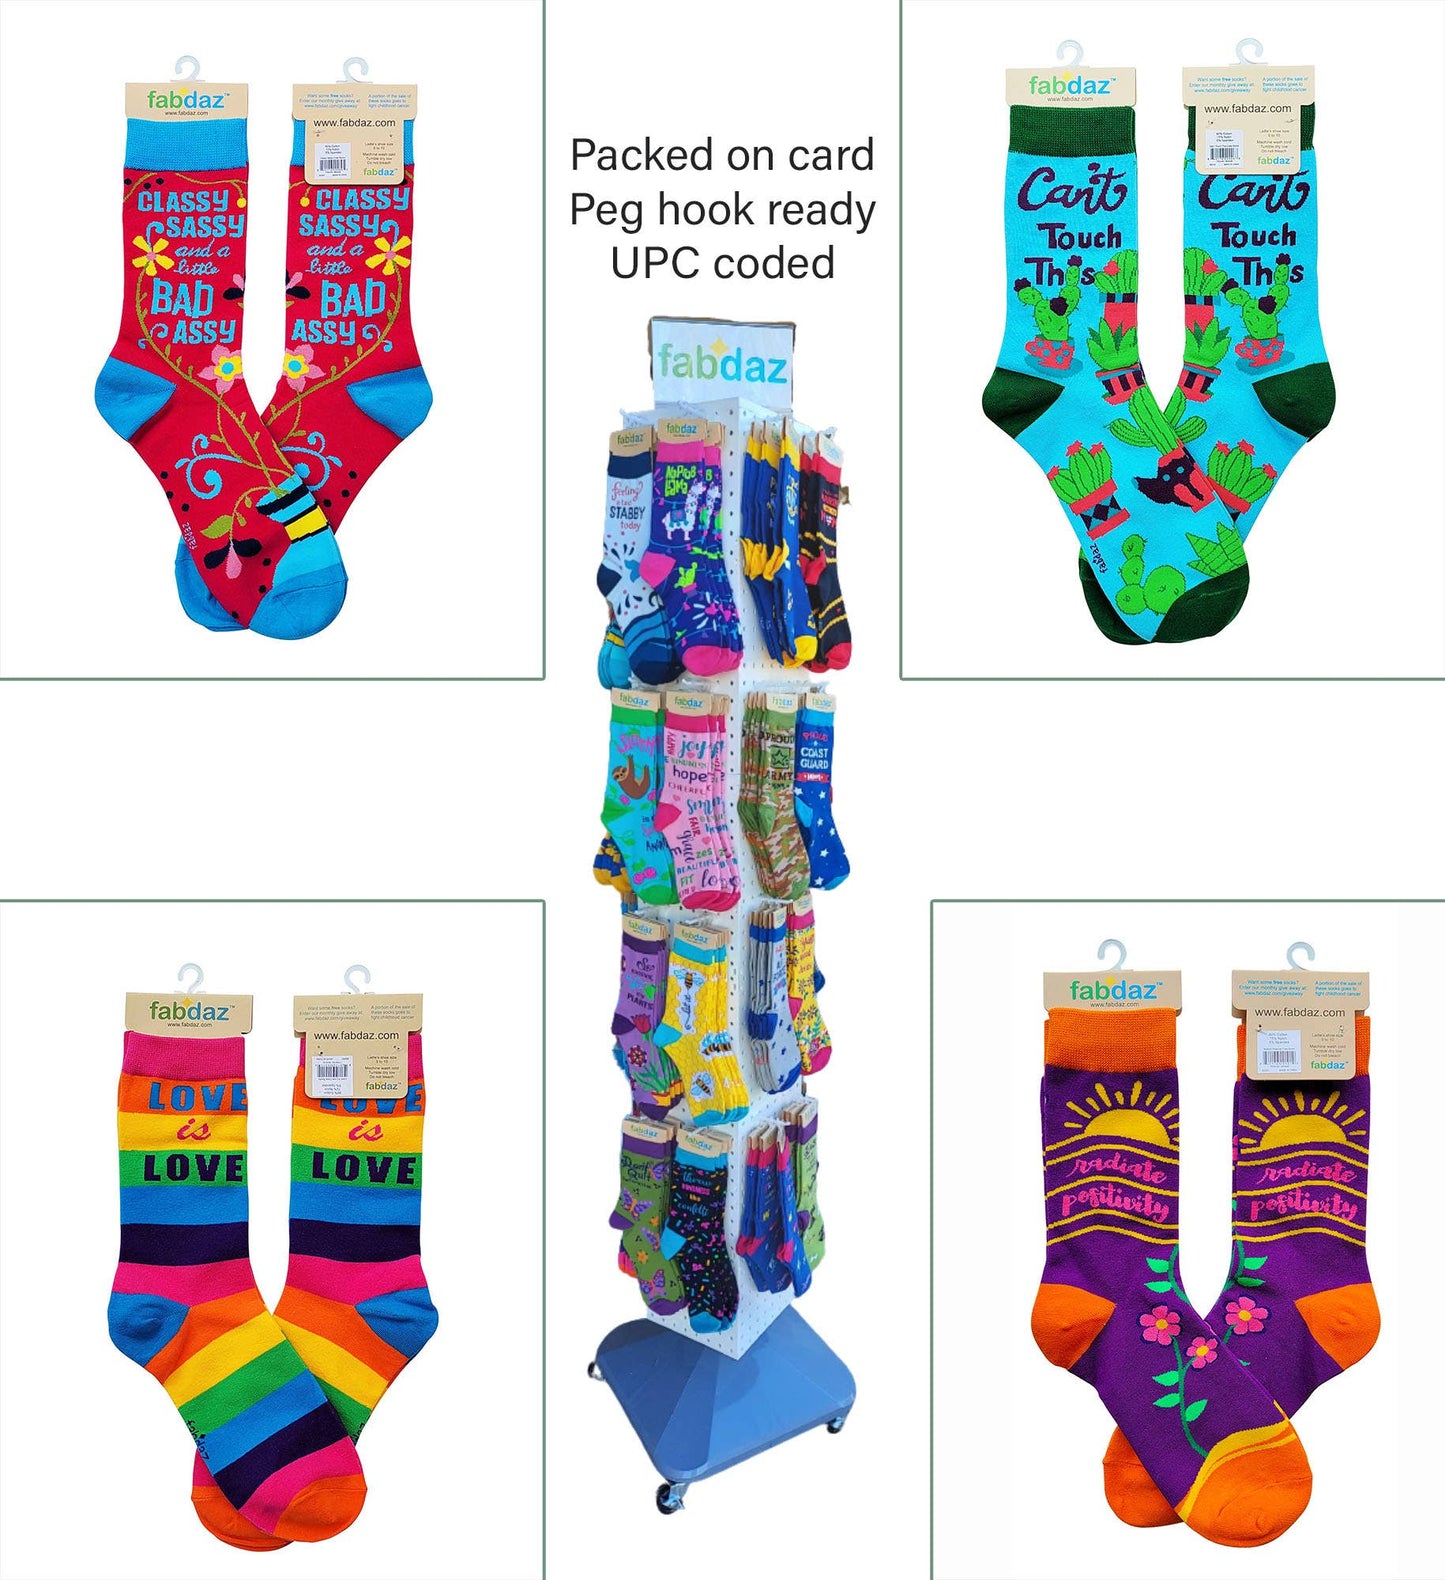 Didn't Mean to Offend You, it's Just a Bonus! Women's Socks